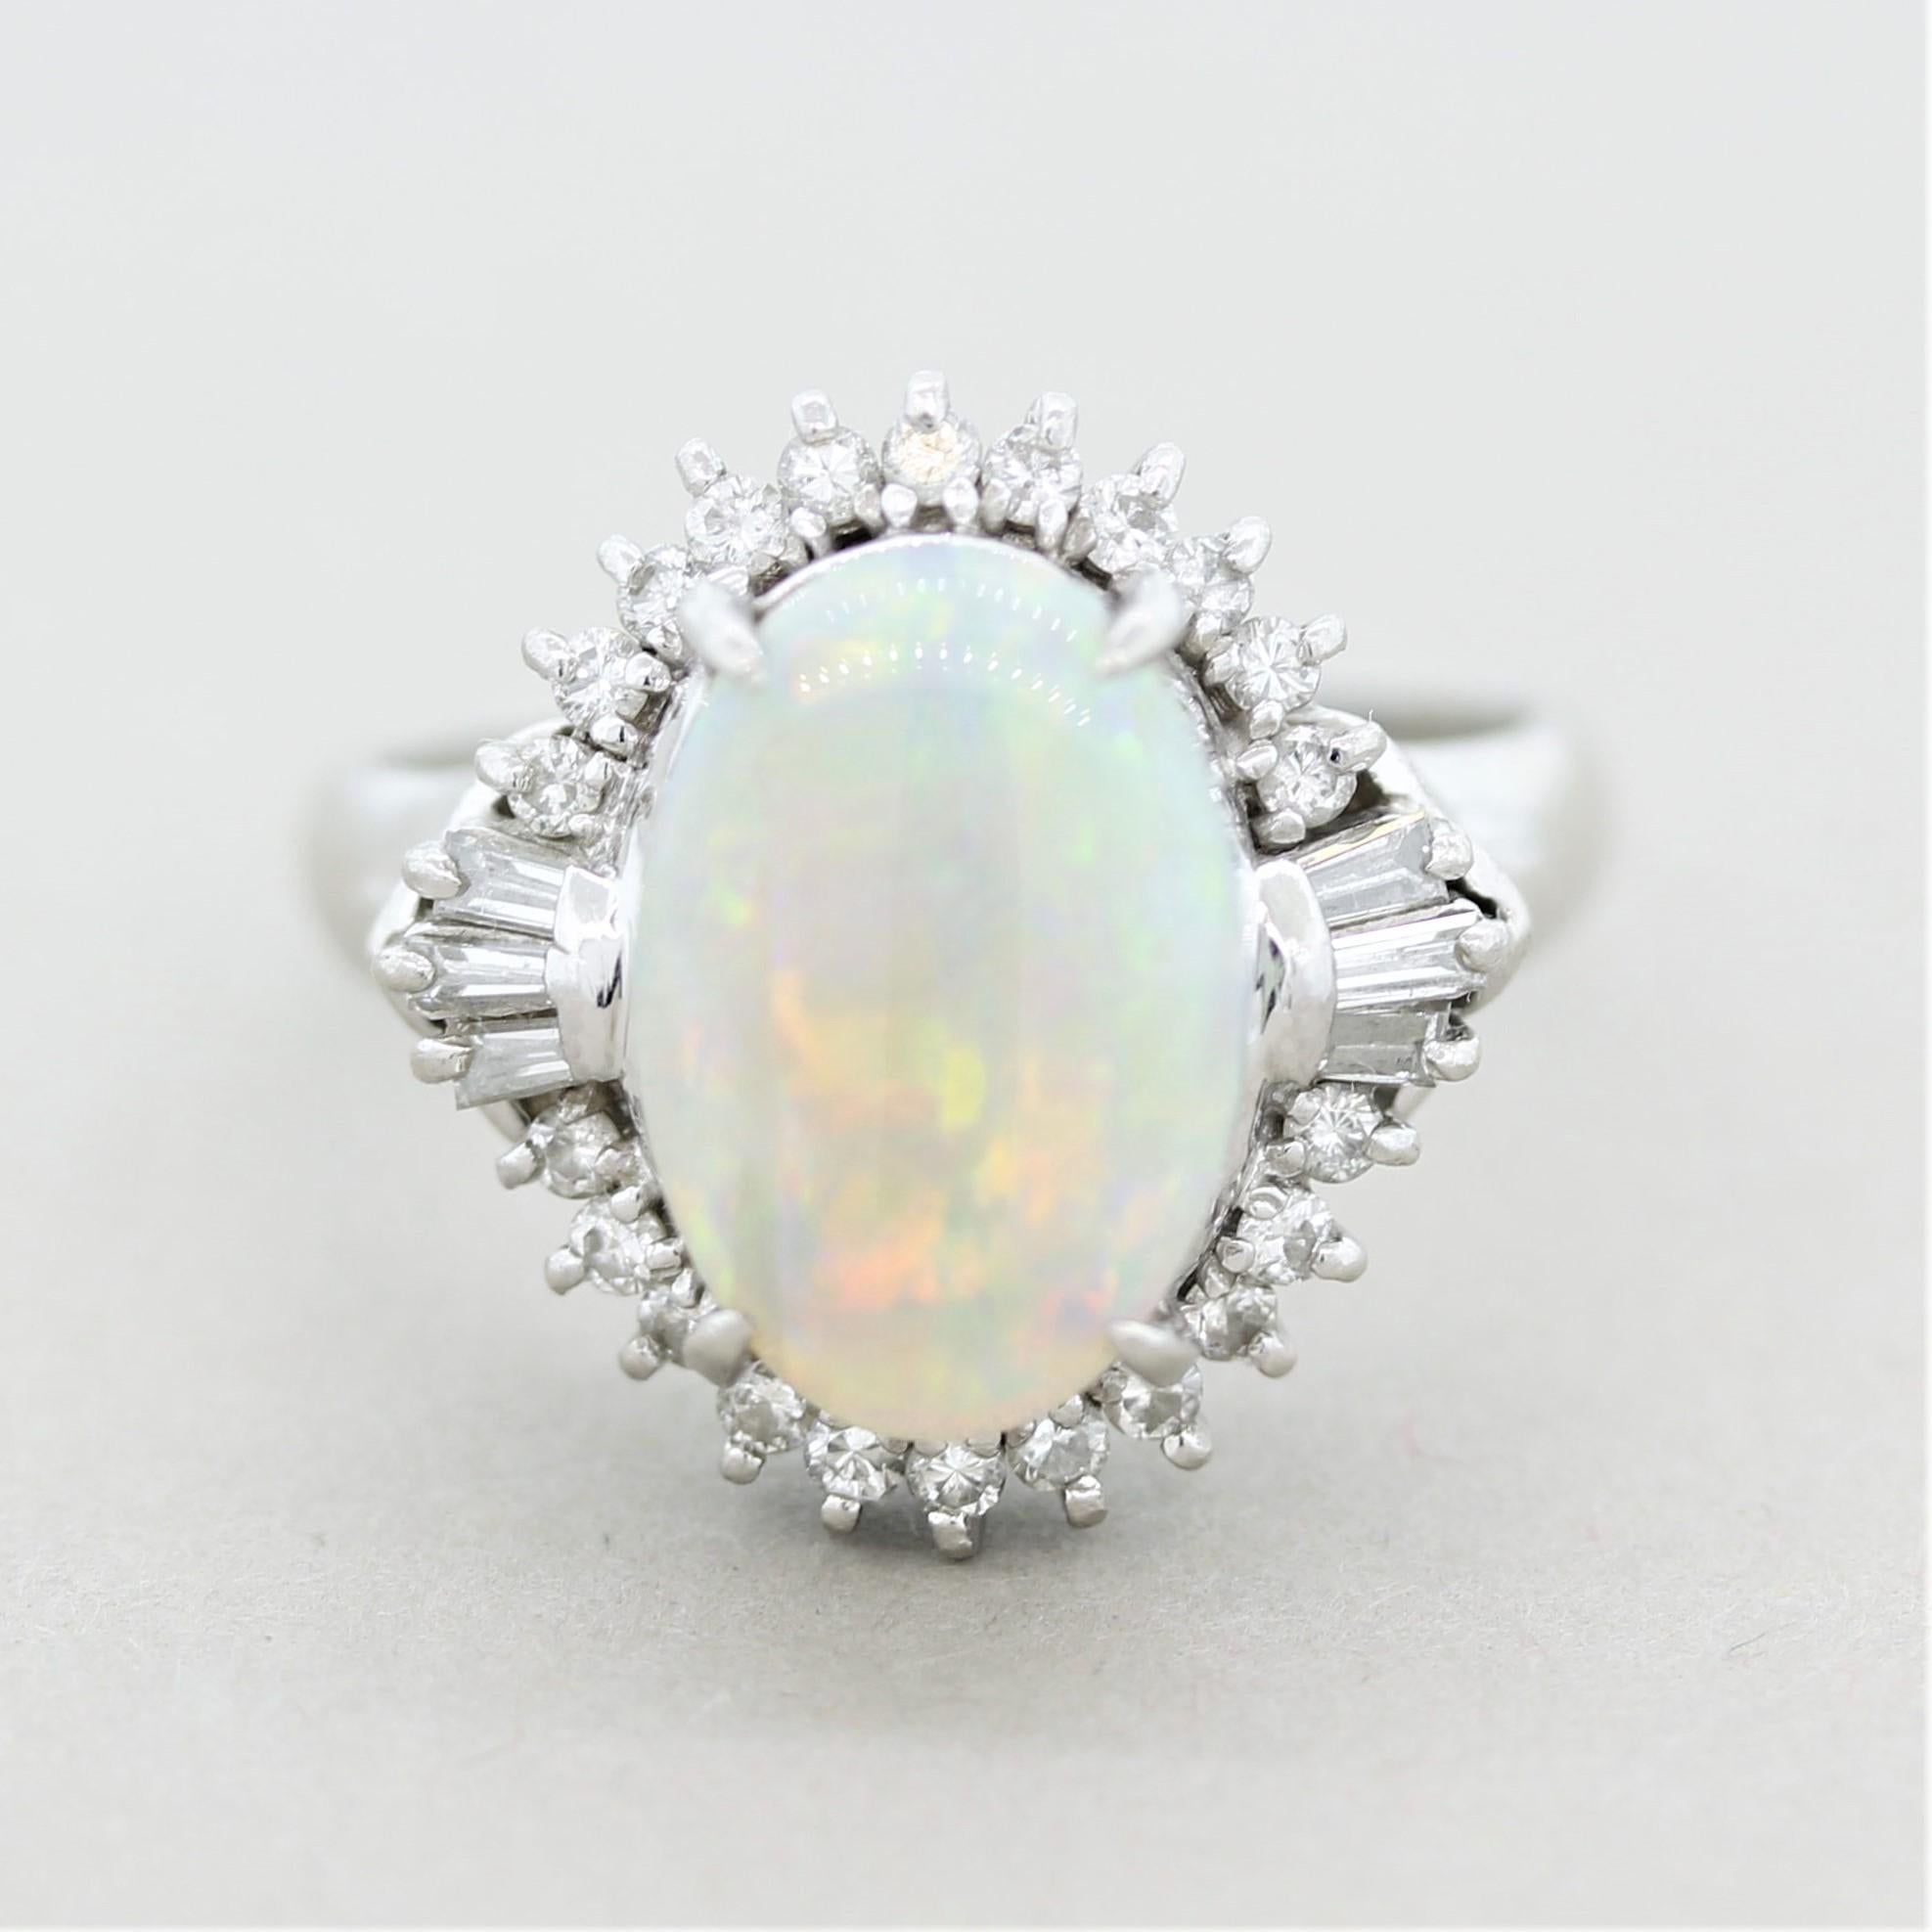 A simply stunning Australian opal takes center stage! It weighs 3.33 carats and has excellent play-of-color as large and bright flashes of color can be seen across the entire opal. The primary colors are red, orange, and green with hints of blues,